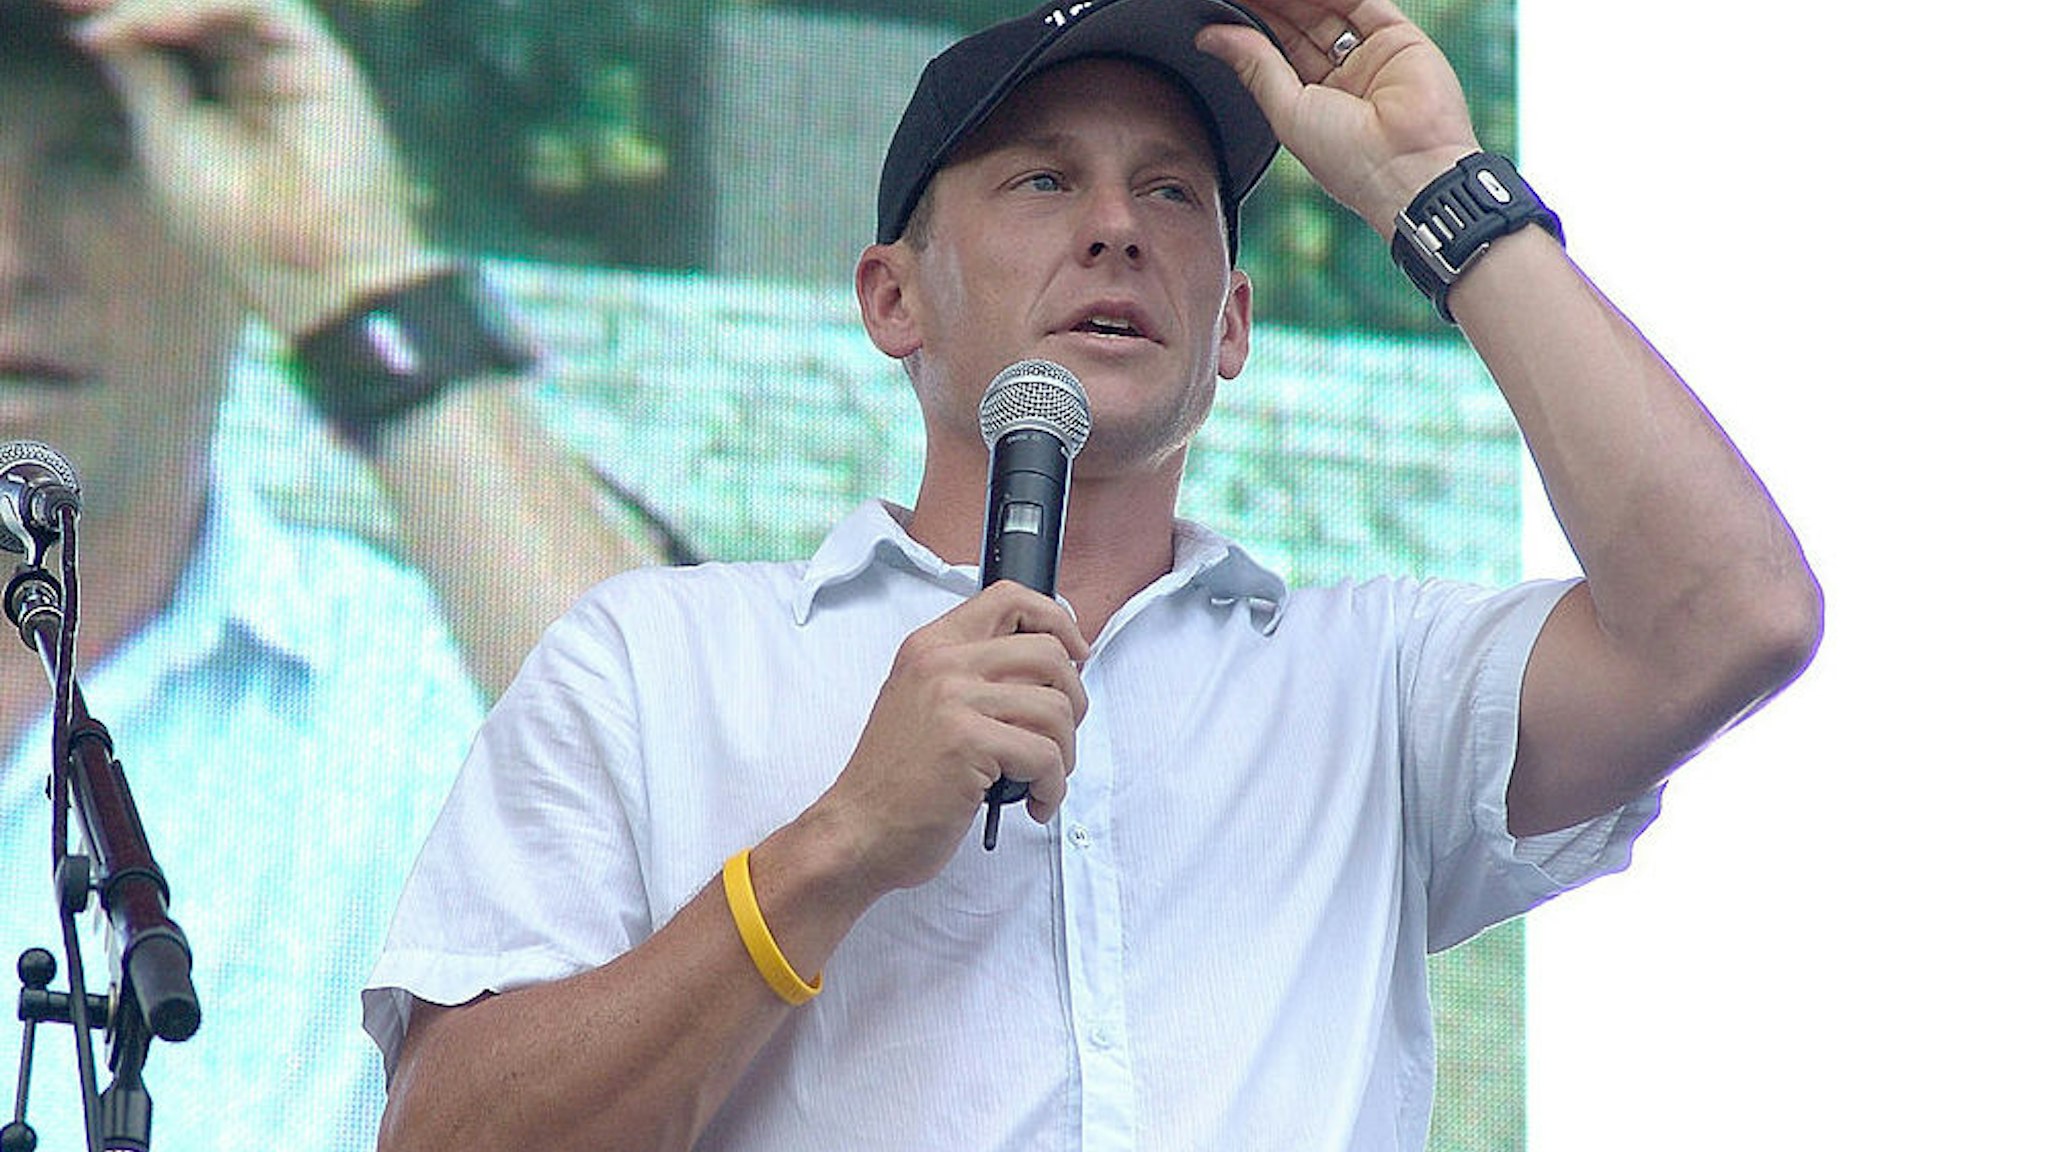 Lance Armstrong speaks to the crowd at his "Thank You Austin" event after his seventh Tour De France win at Auditorium Shores on October 02, 2005 in Austin, Texas.